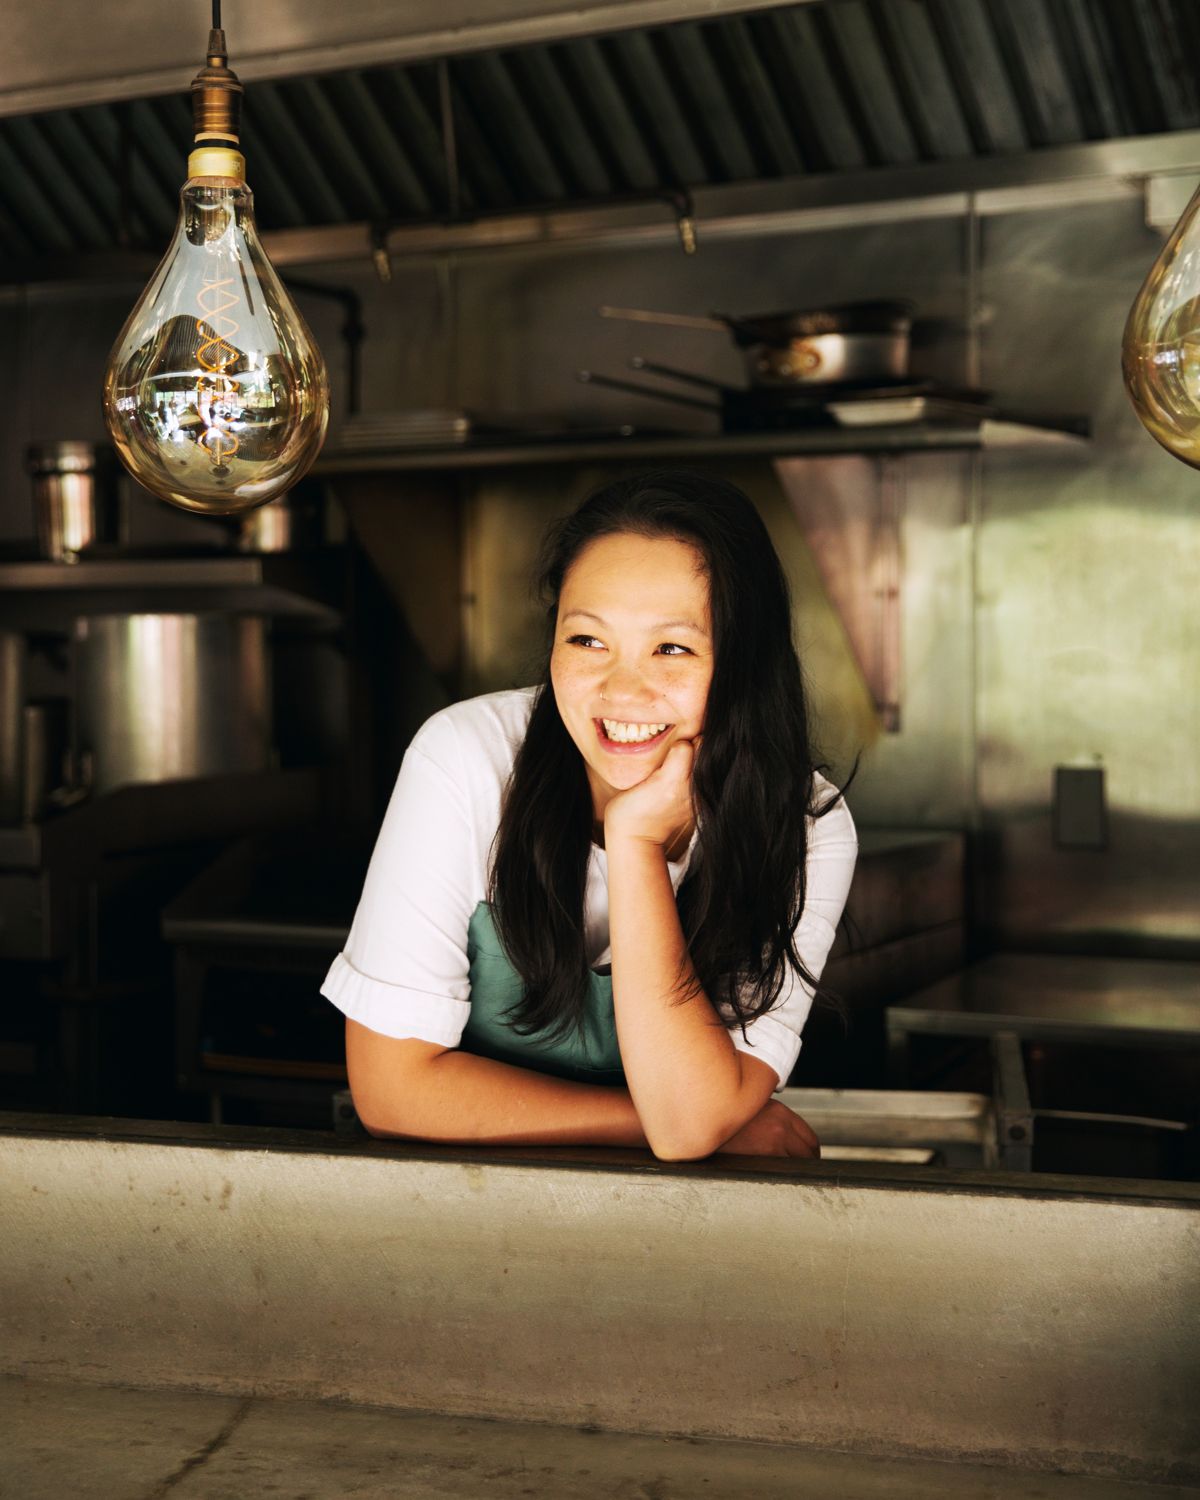 A chef leans on a counter, the oven behind her.